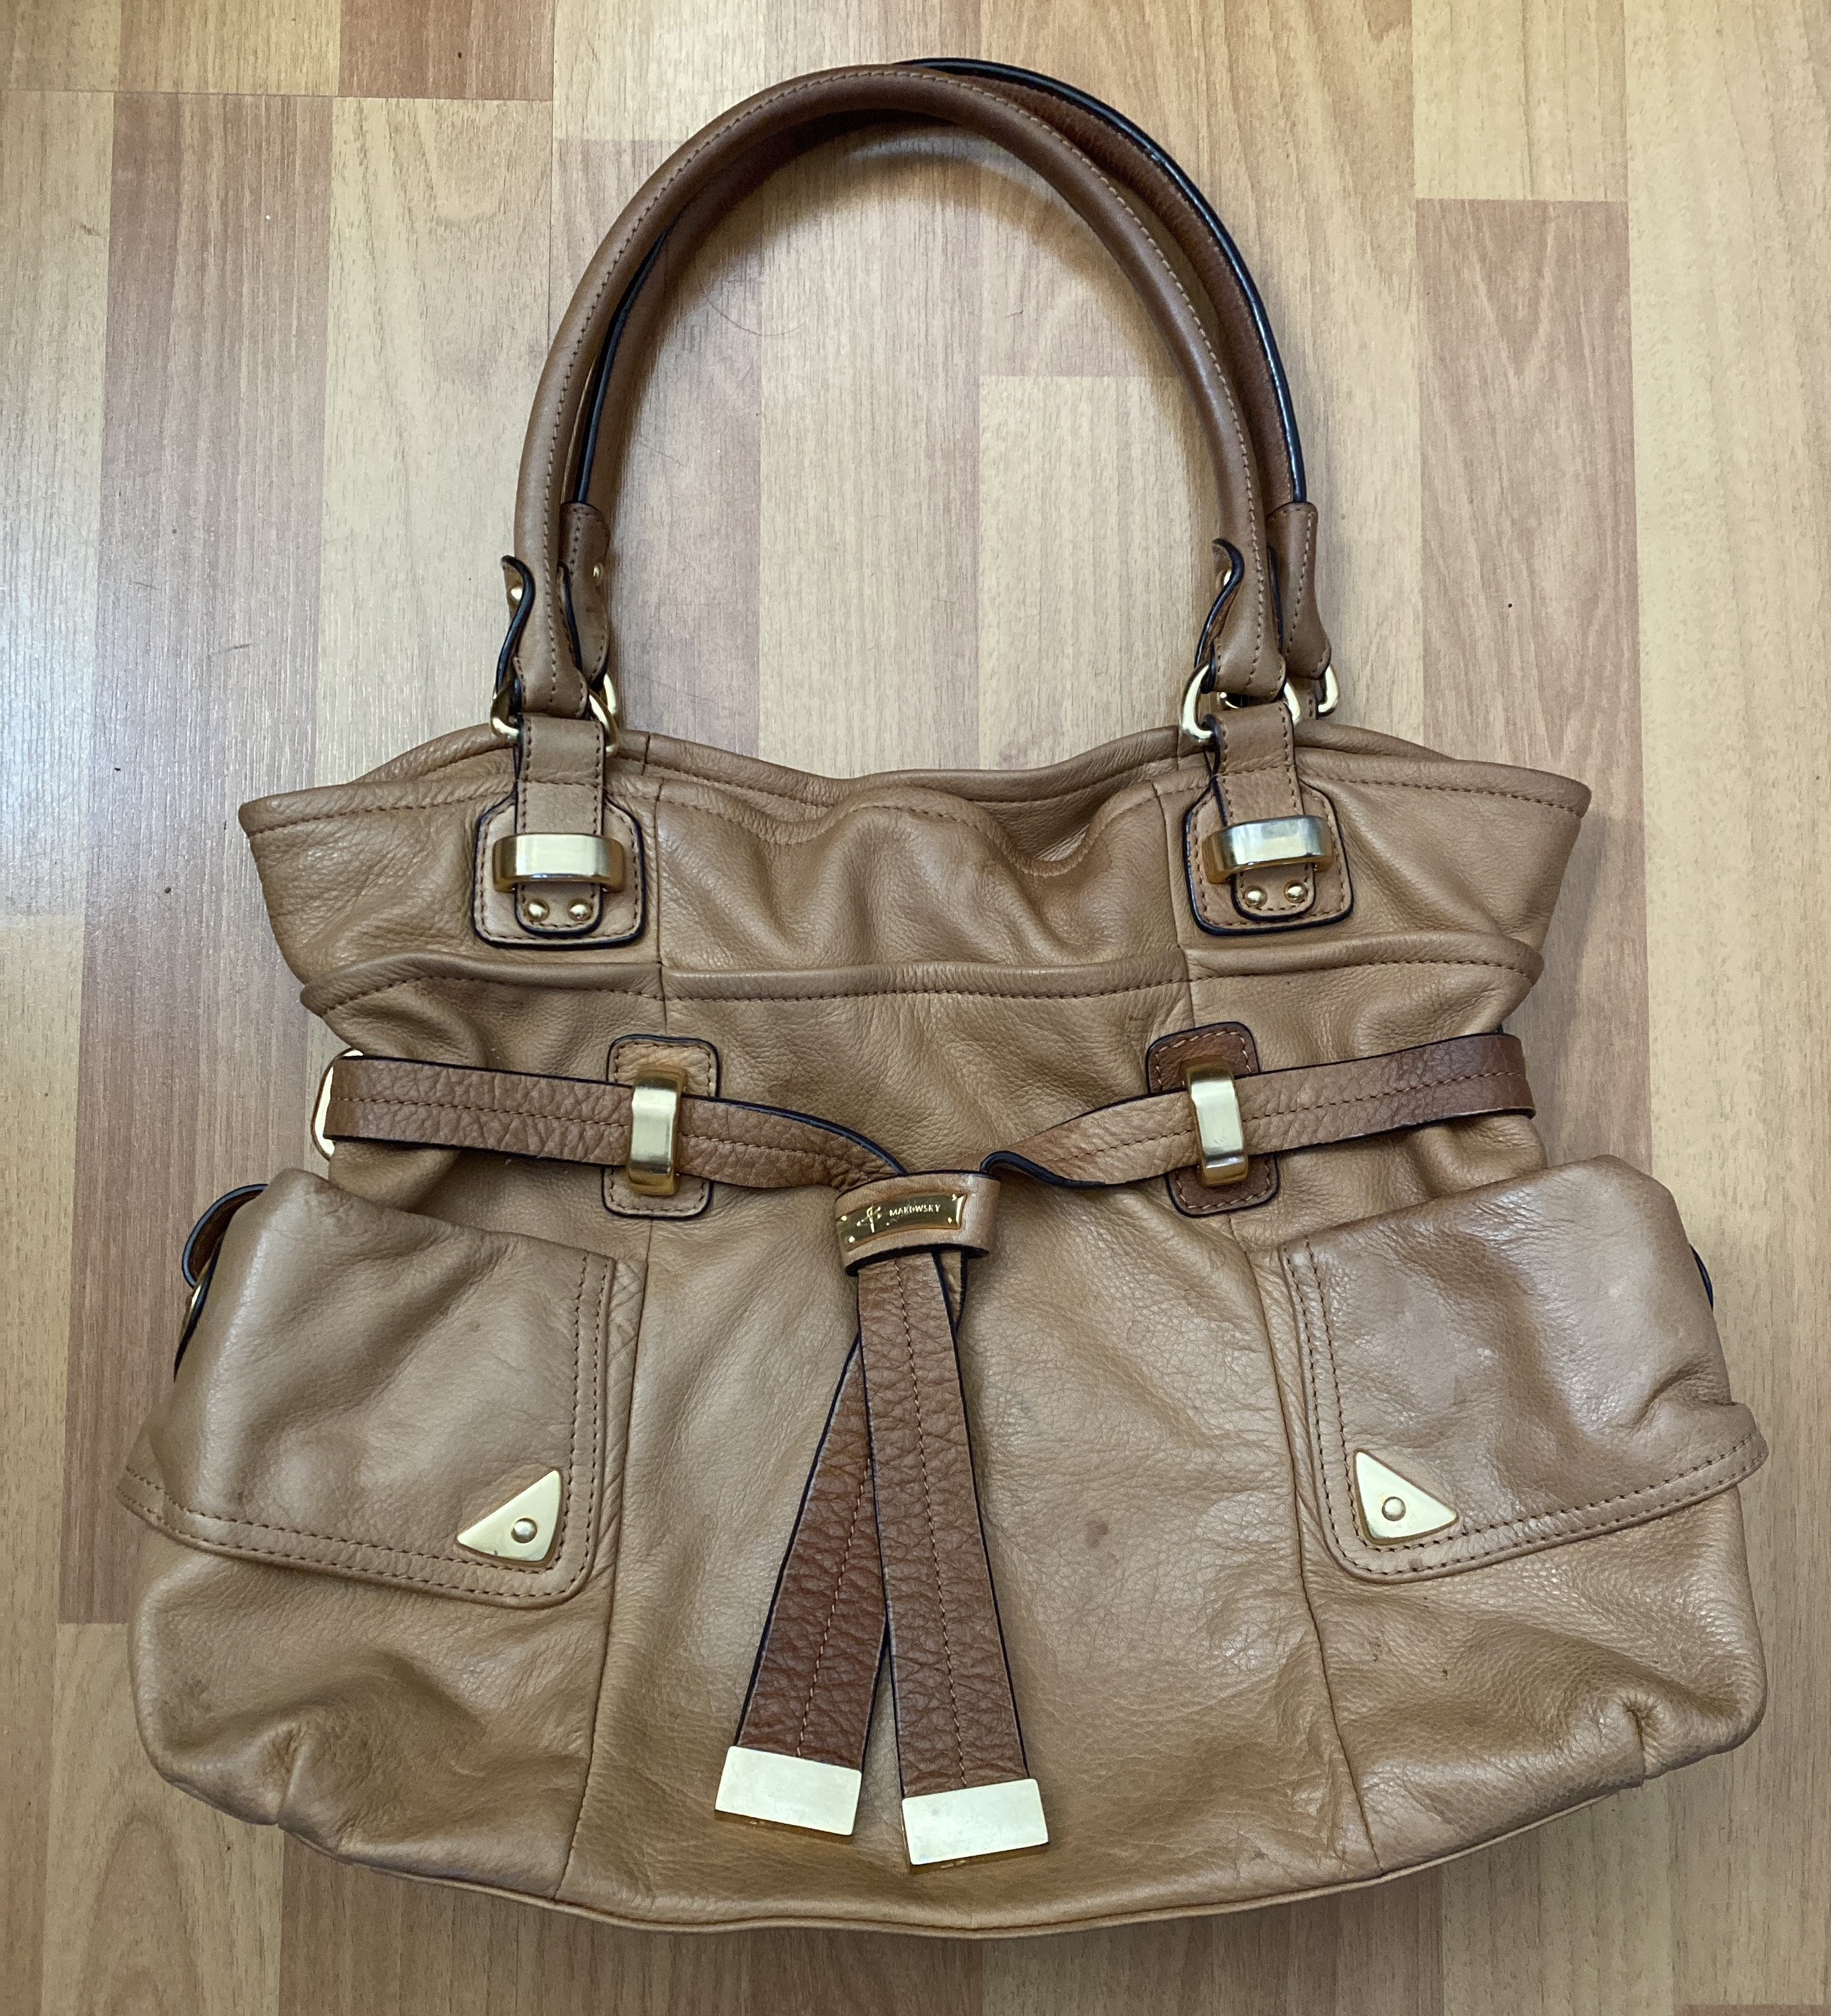 B Makowsky Brown Leather Purse | Brown leather purses, Brown leather shoulder  bag, Vegan leather shoulder bag